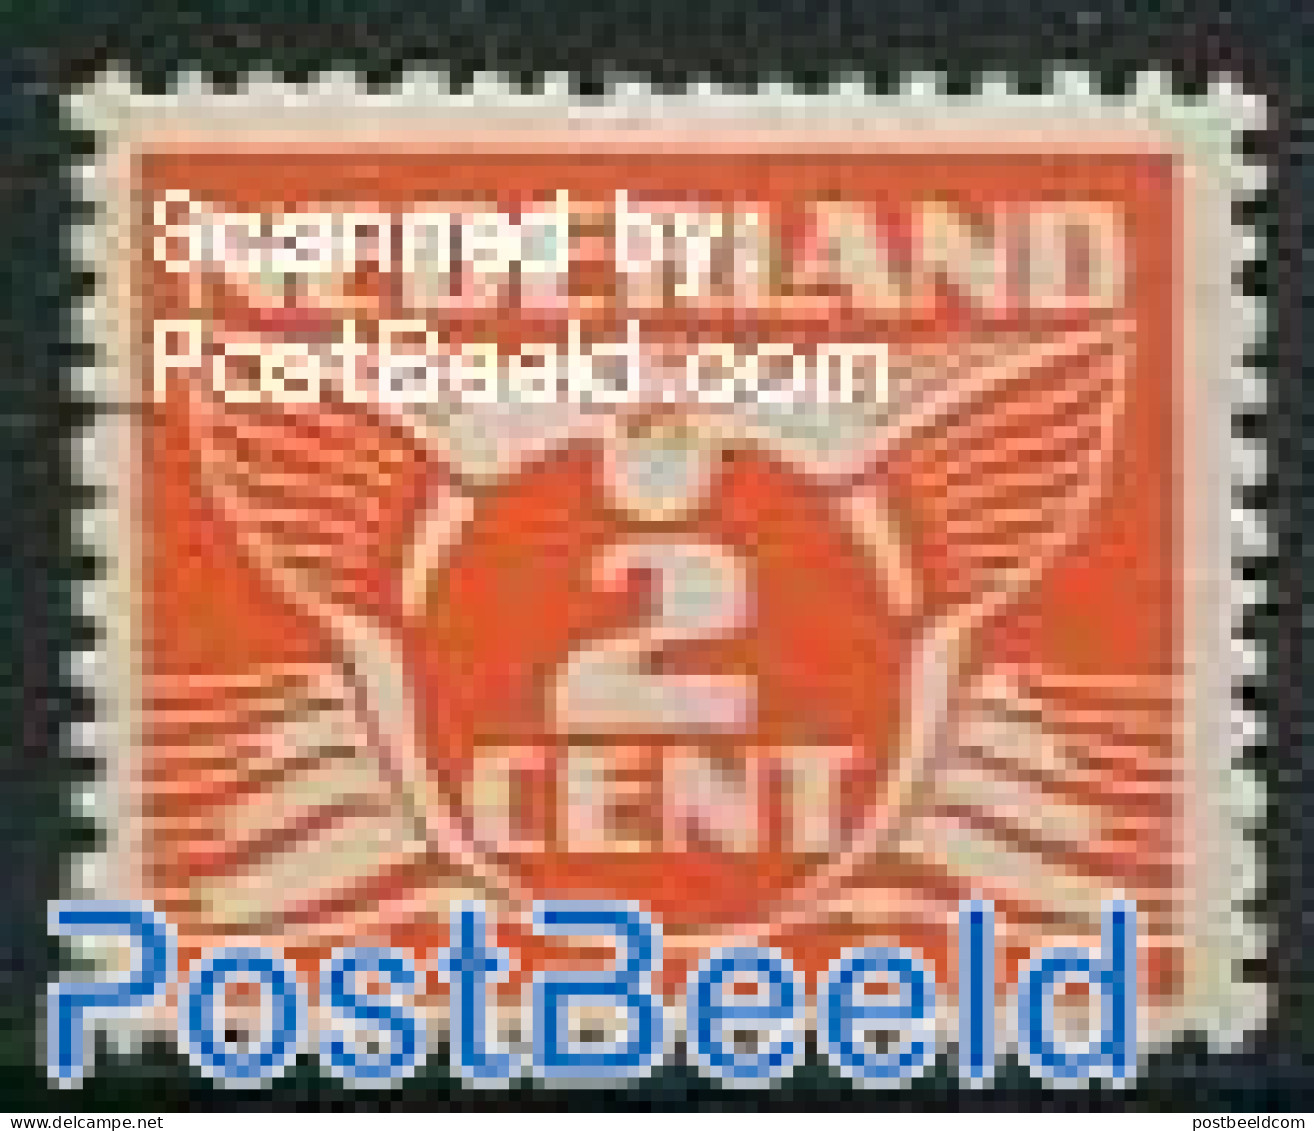 Netherlands 1924 2c, Without WM, Stamp Out Of Set, Mint NH - Nuovi